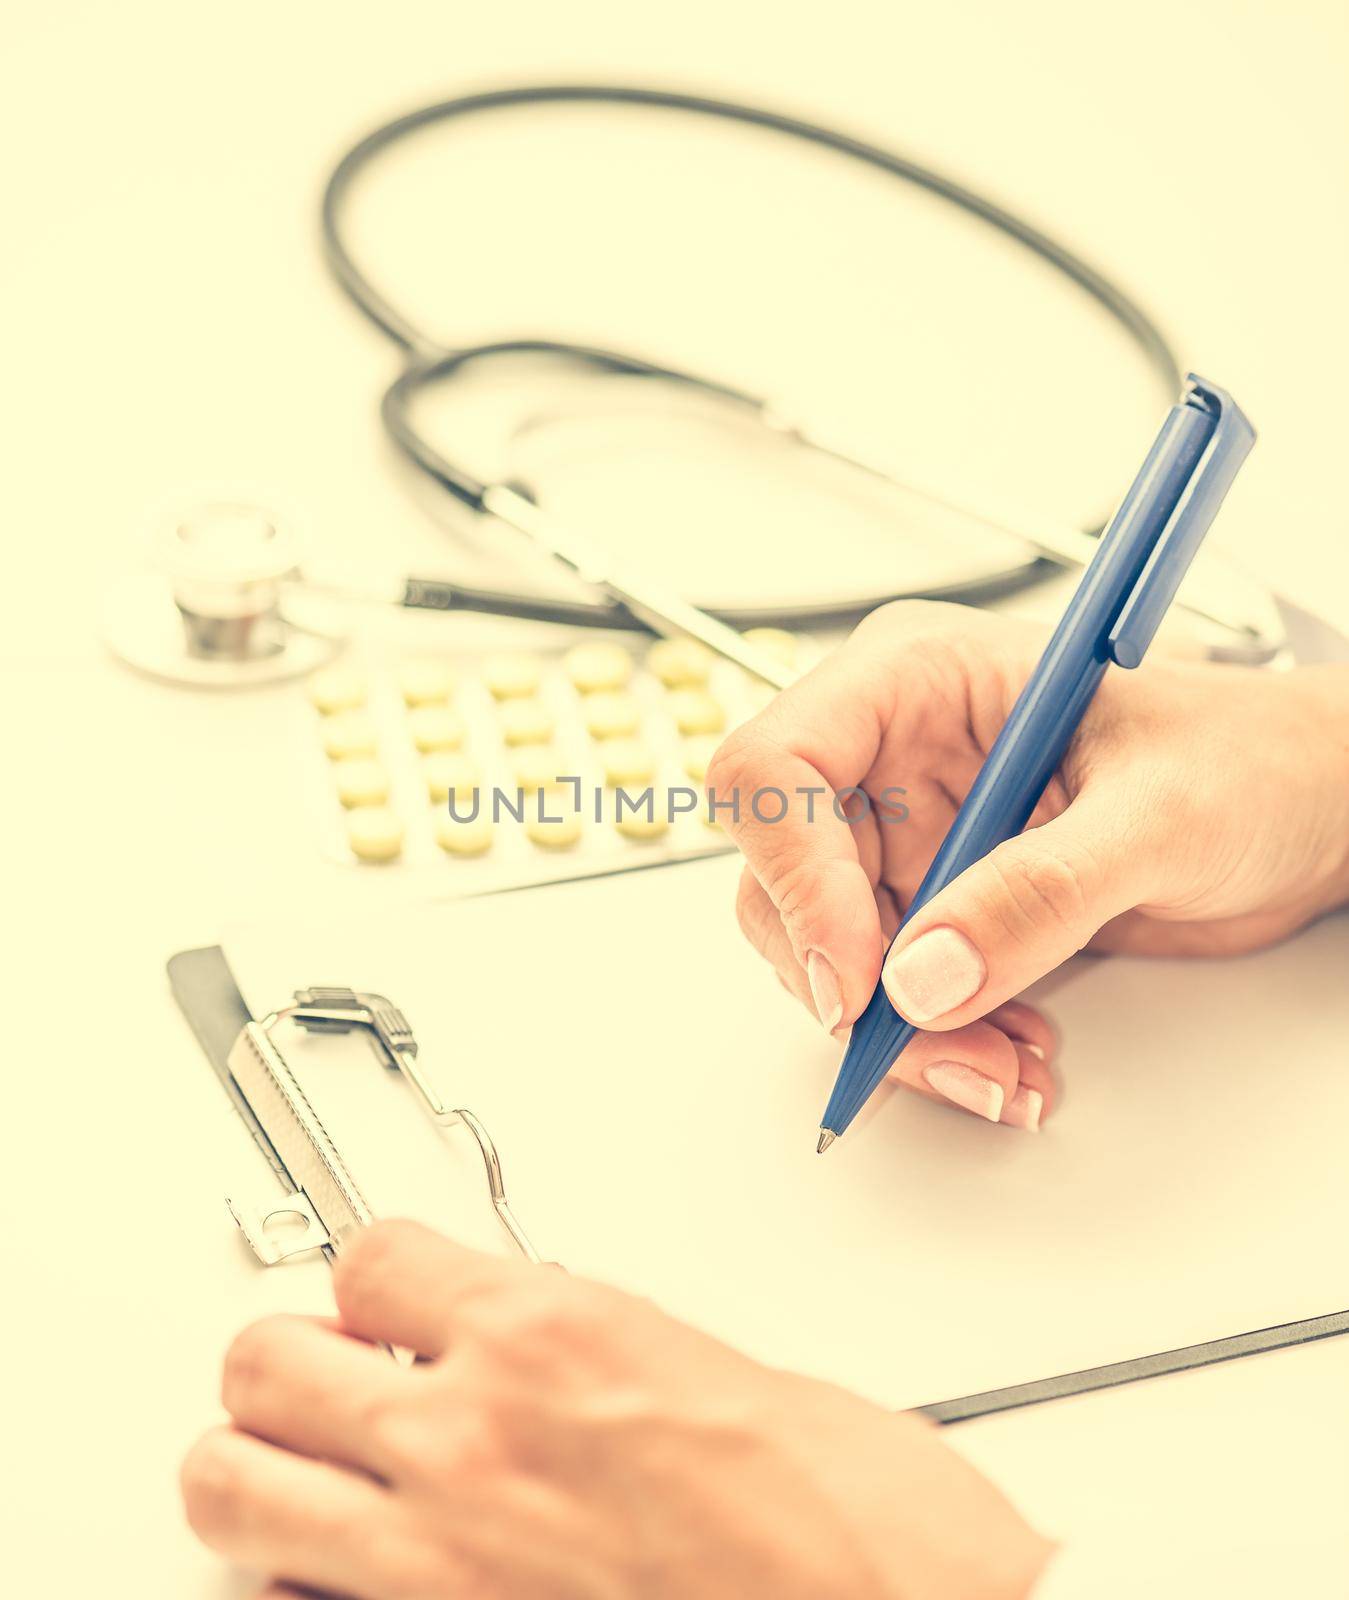 doctor writing a prescription at the workplace with pills and stethoscope